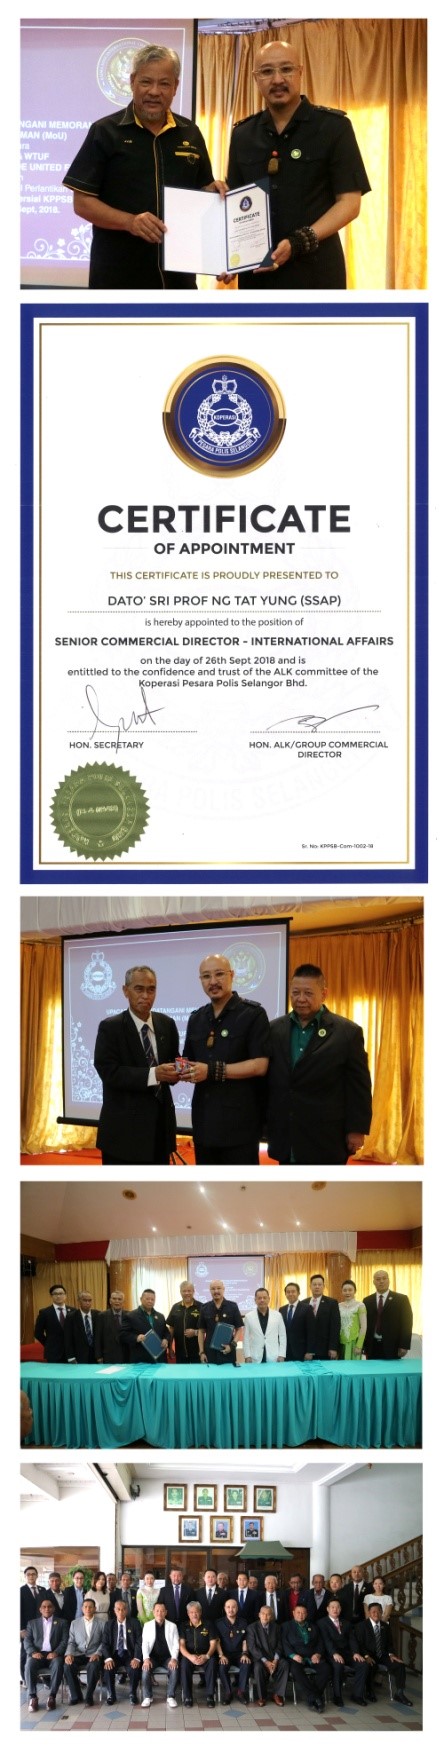 The photos of MoU signing ceremony and appointment ceremony